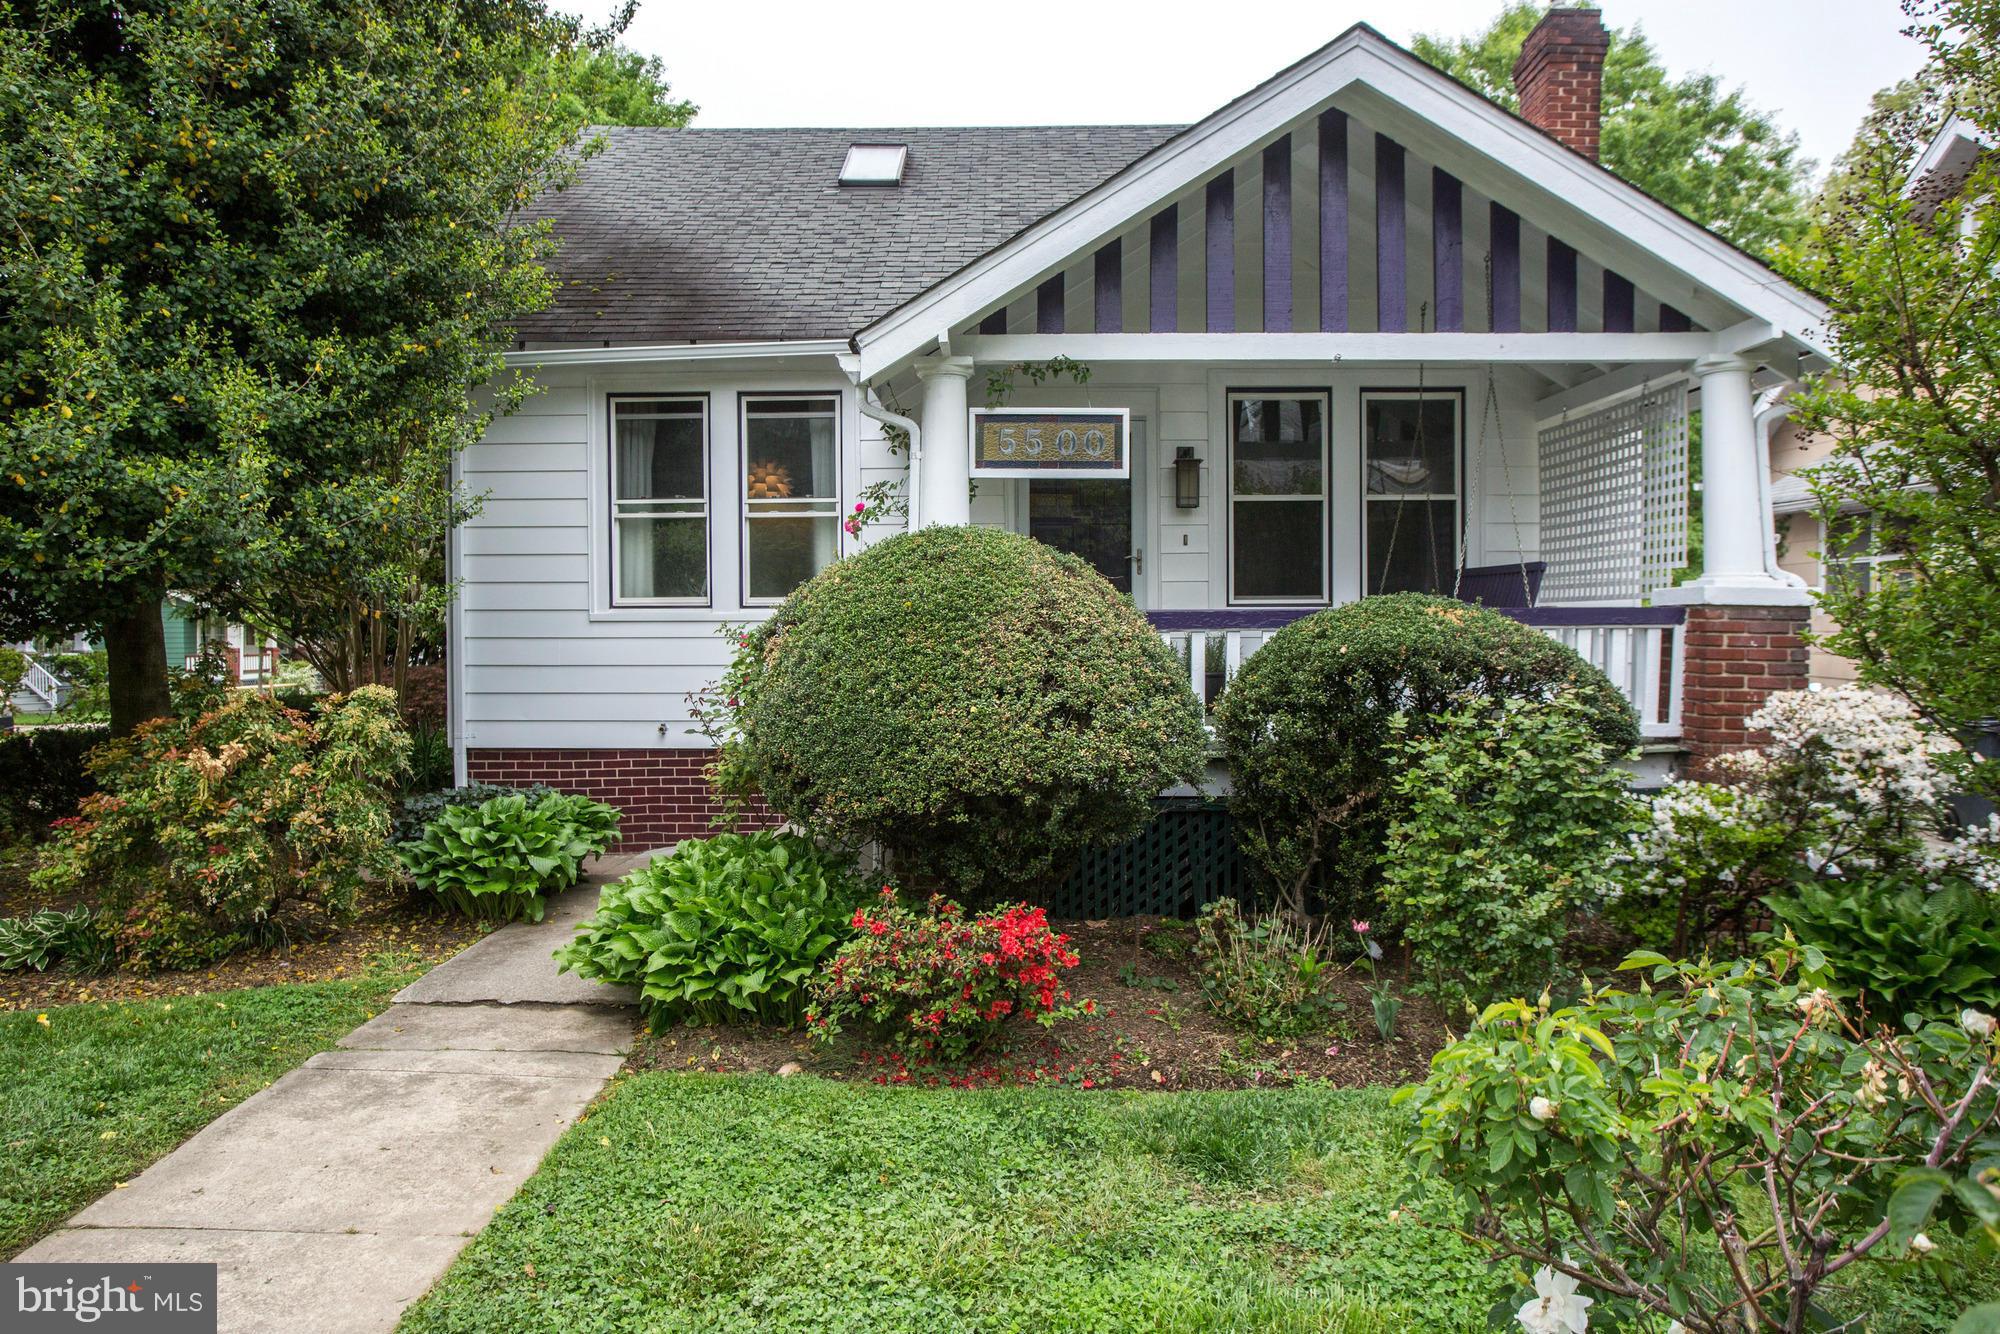 a front view of a house with a yard and flower plants